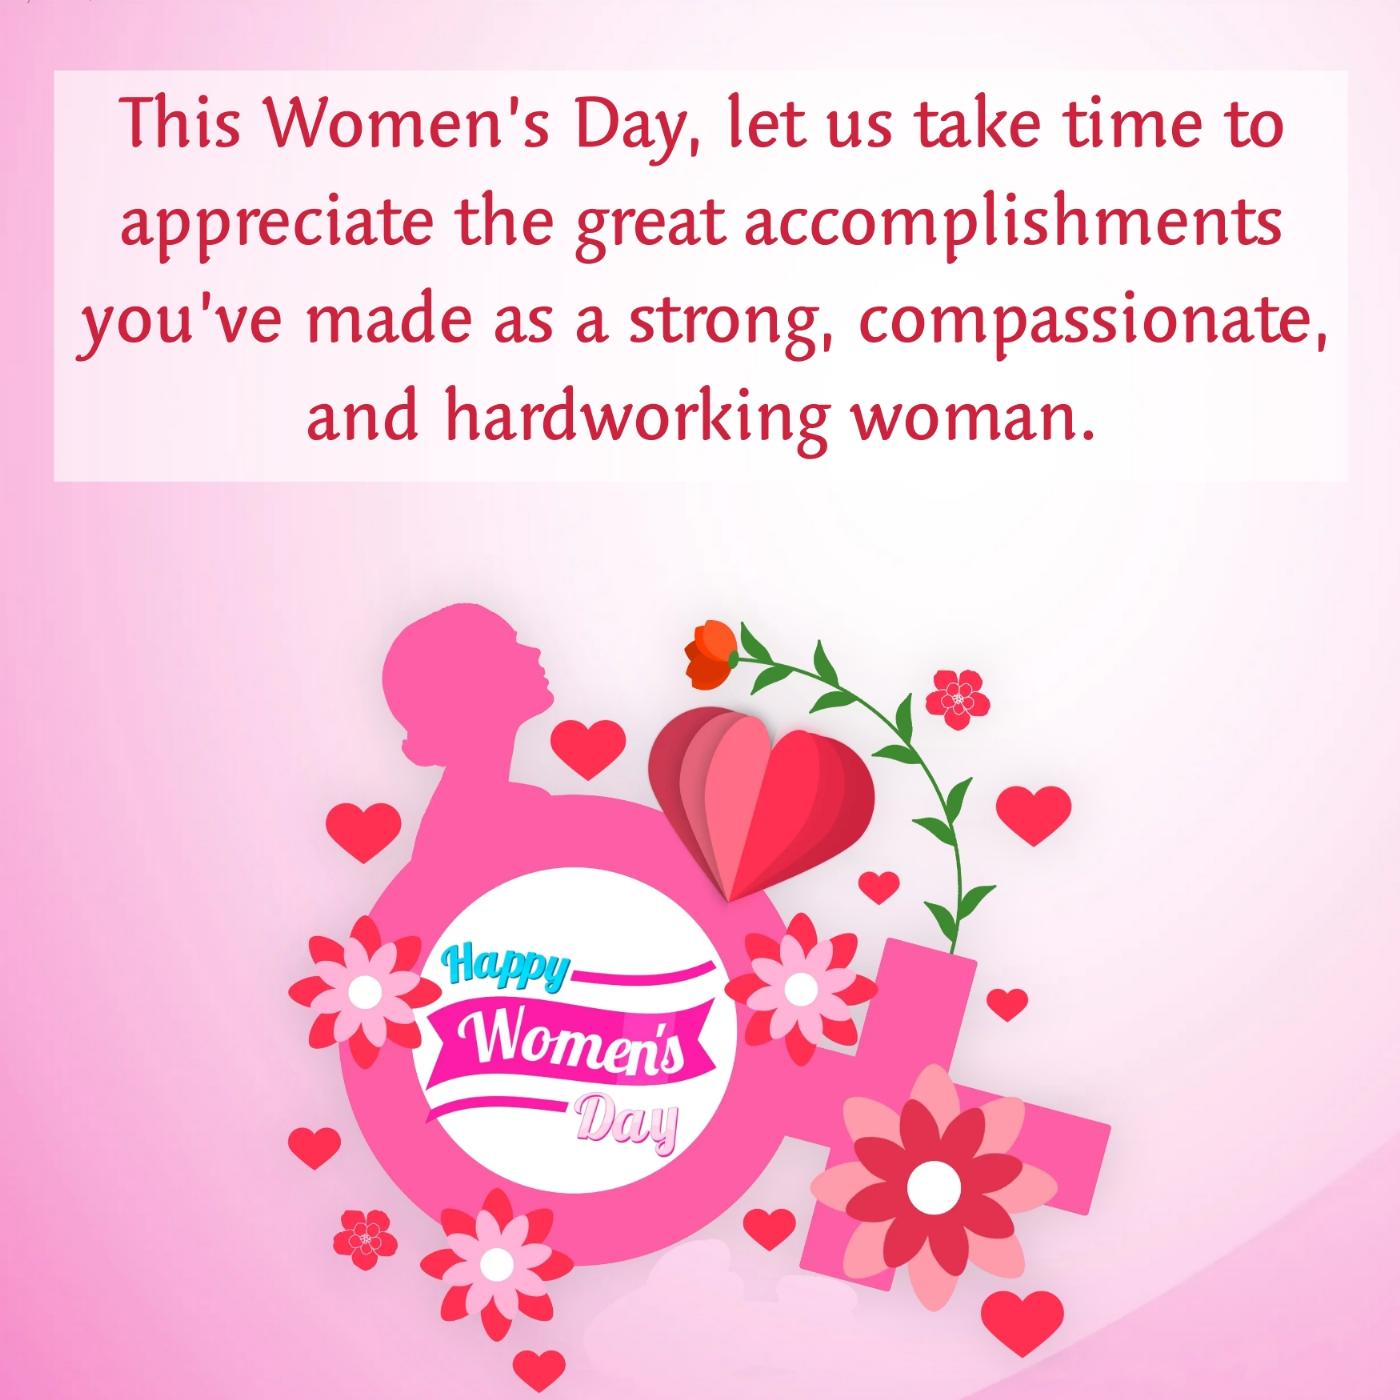 This Womens Day let us take time to appreciate the great accomplishments